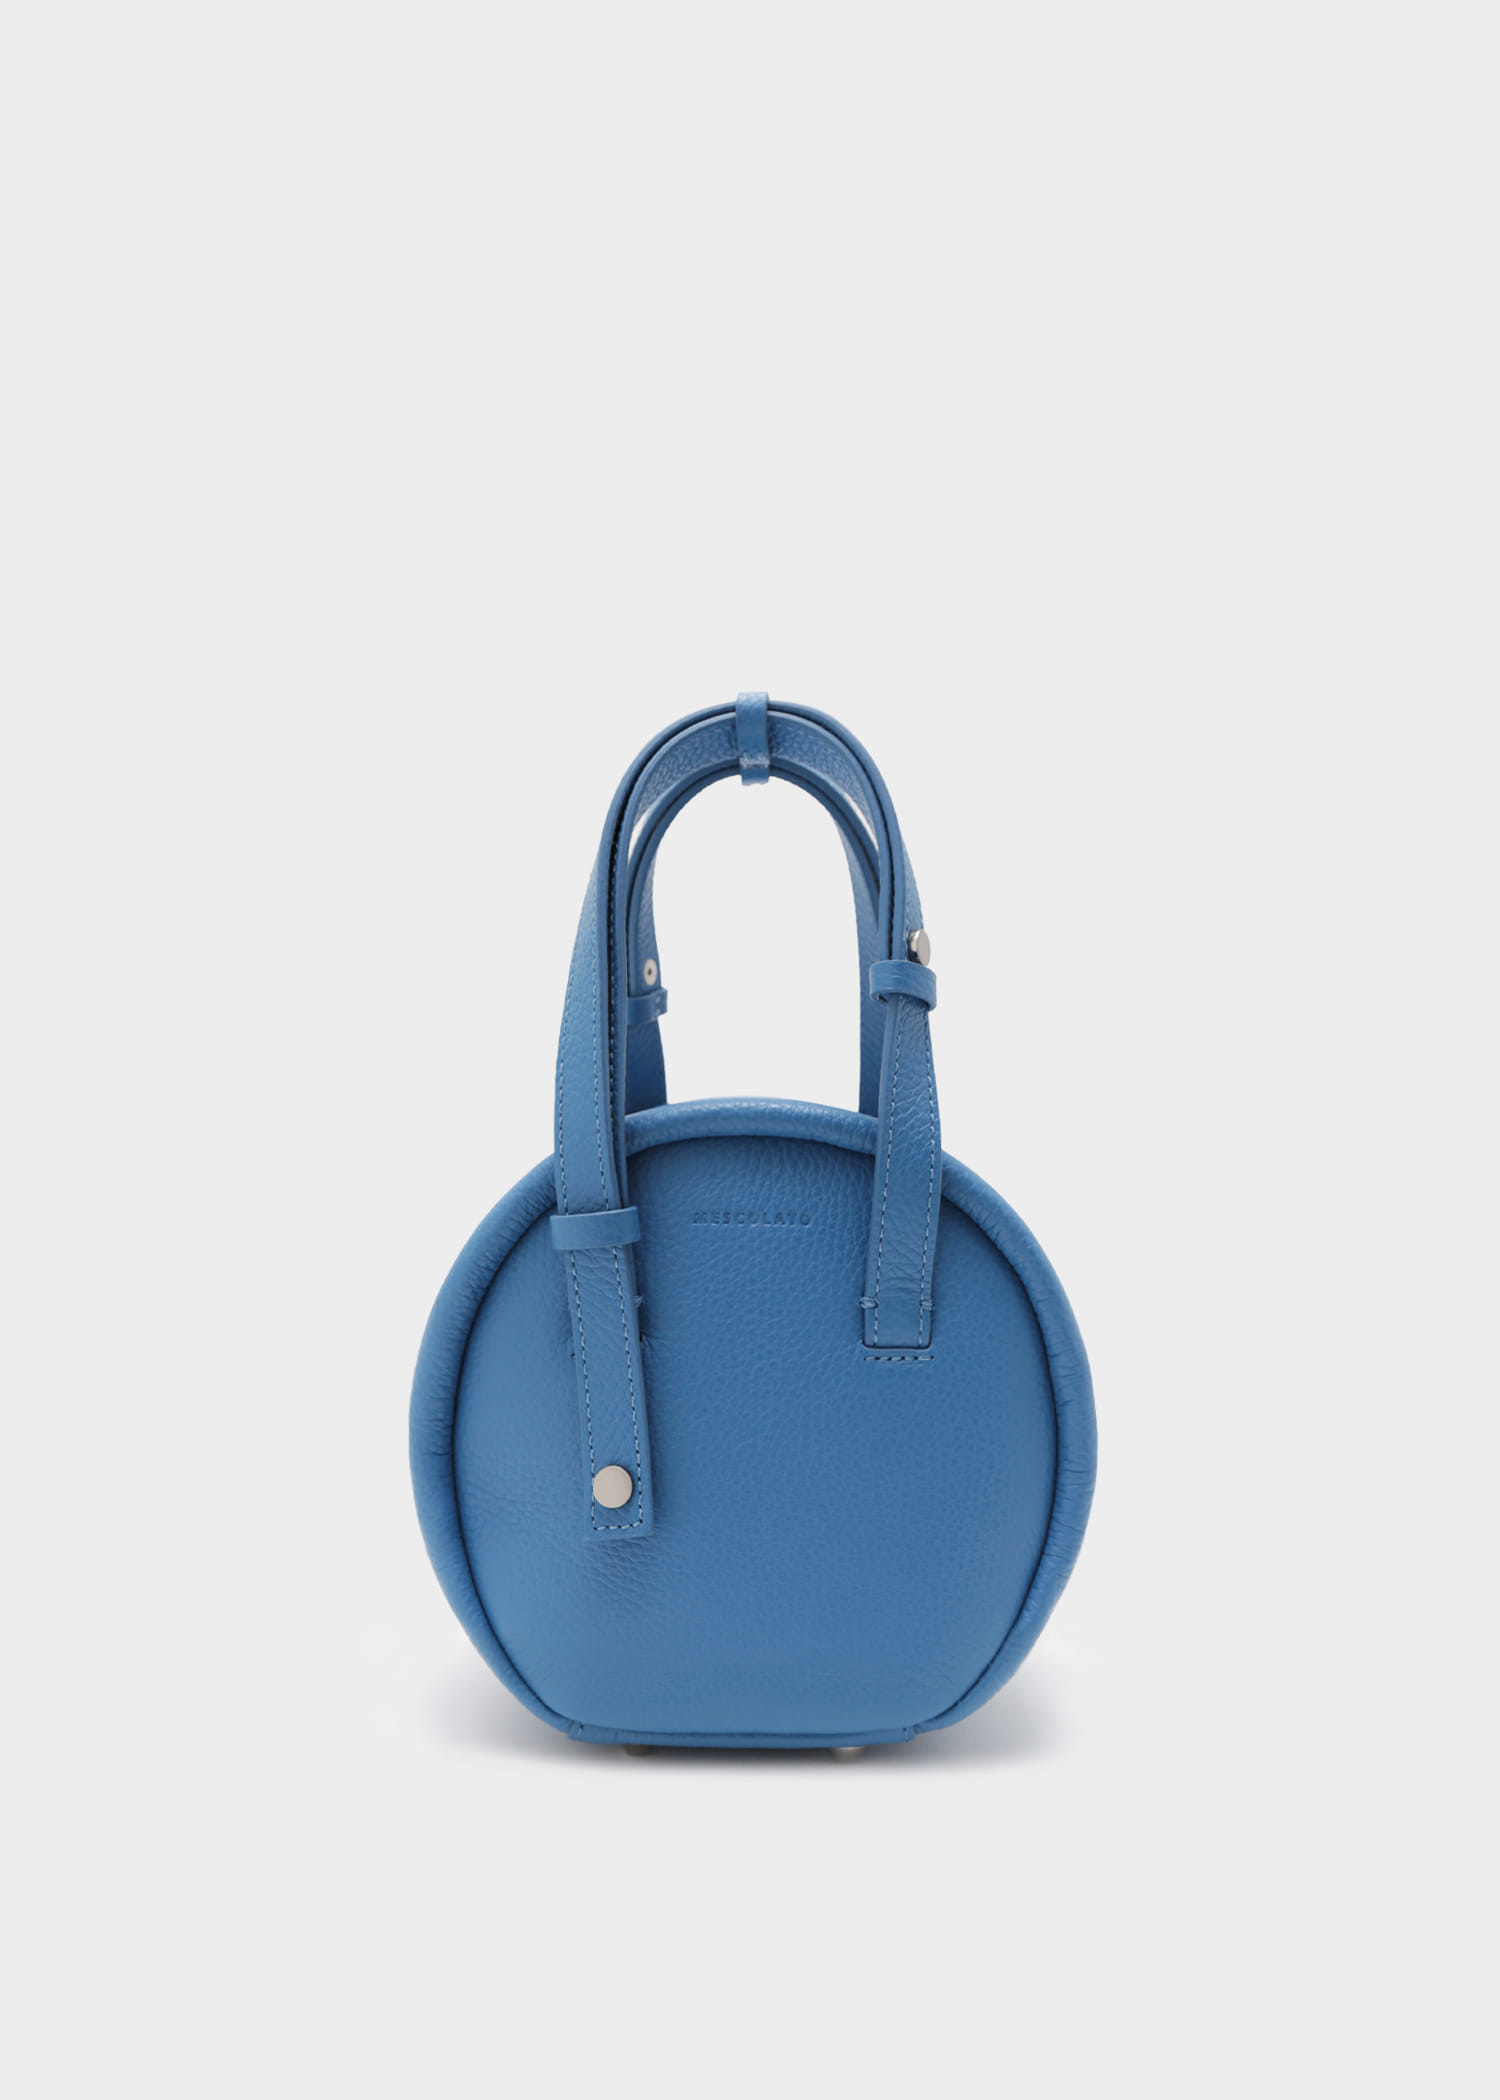 PUFFIE TWO-WAY BLUE GRAIN LEATHER